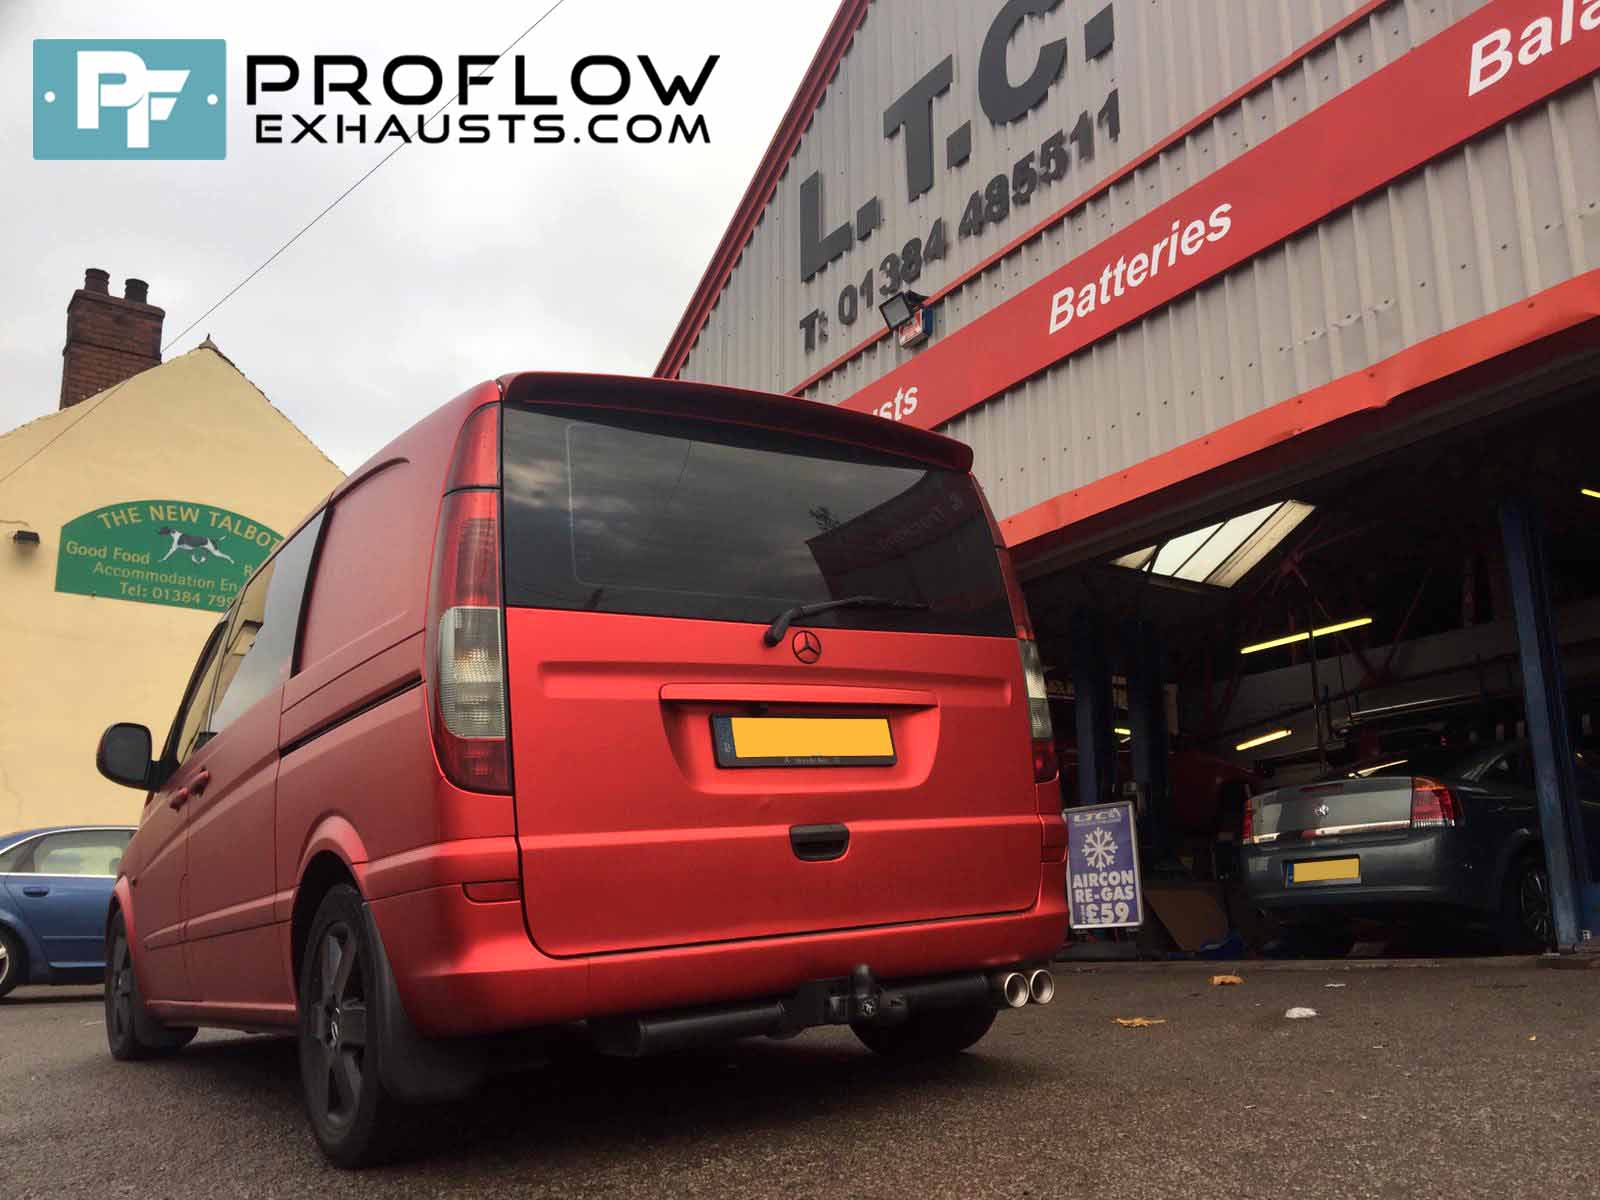 Mercedes Vito Fitted With Proflow Custom Exhaust 3